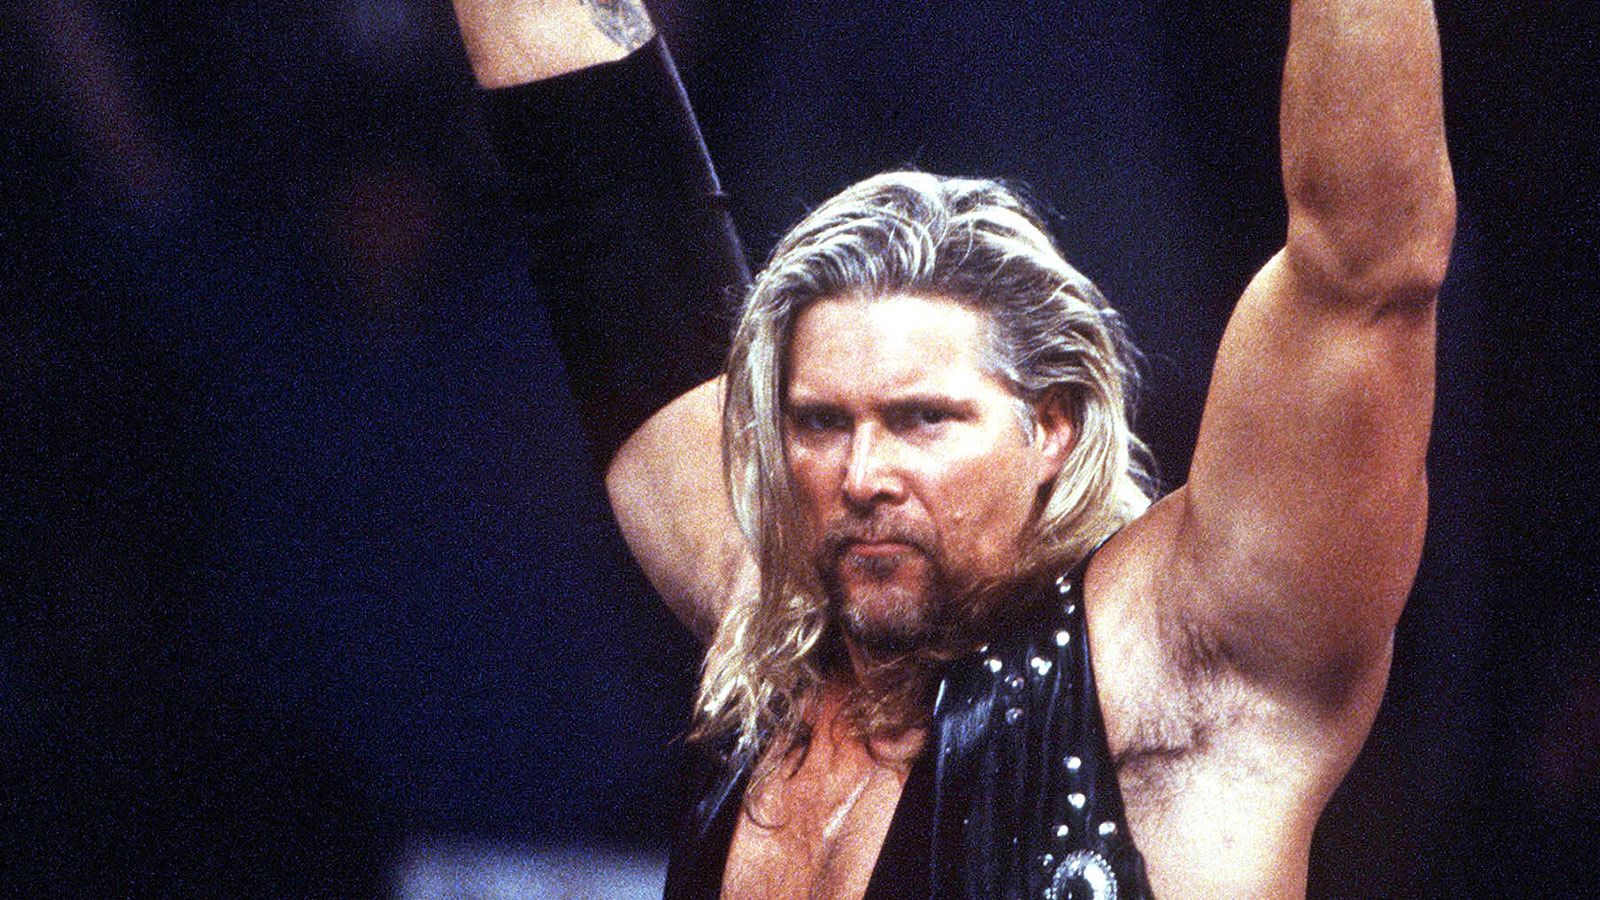 WWE legend Kevin Nash will donate his brain for CTE research